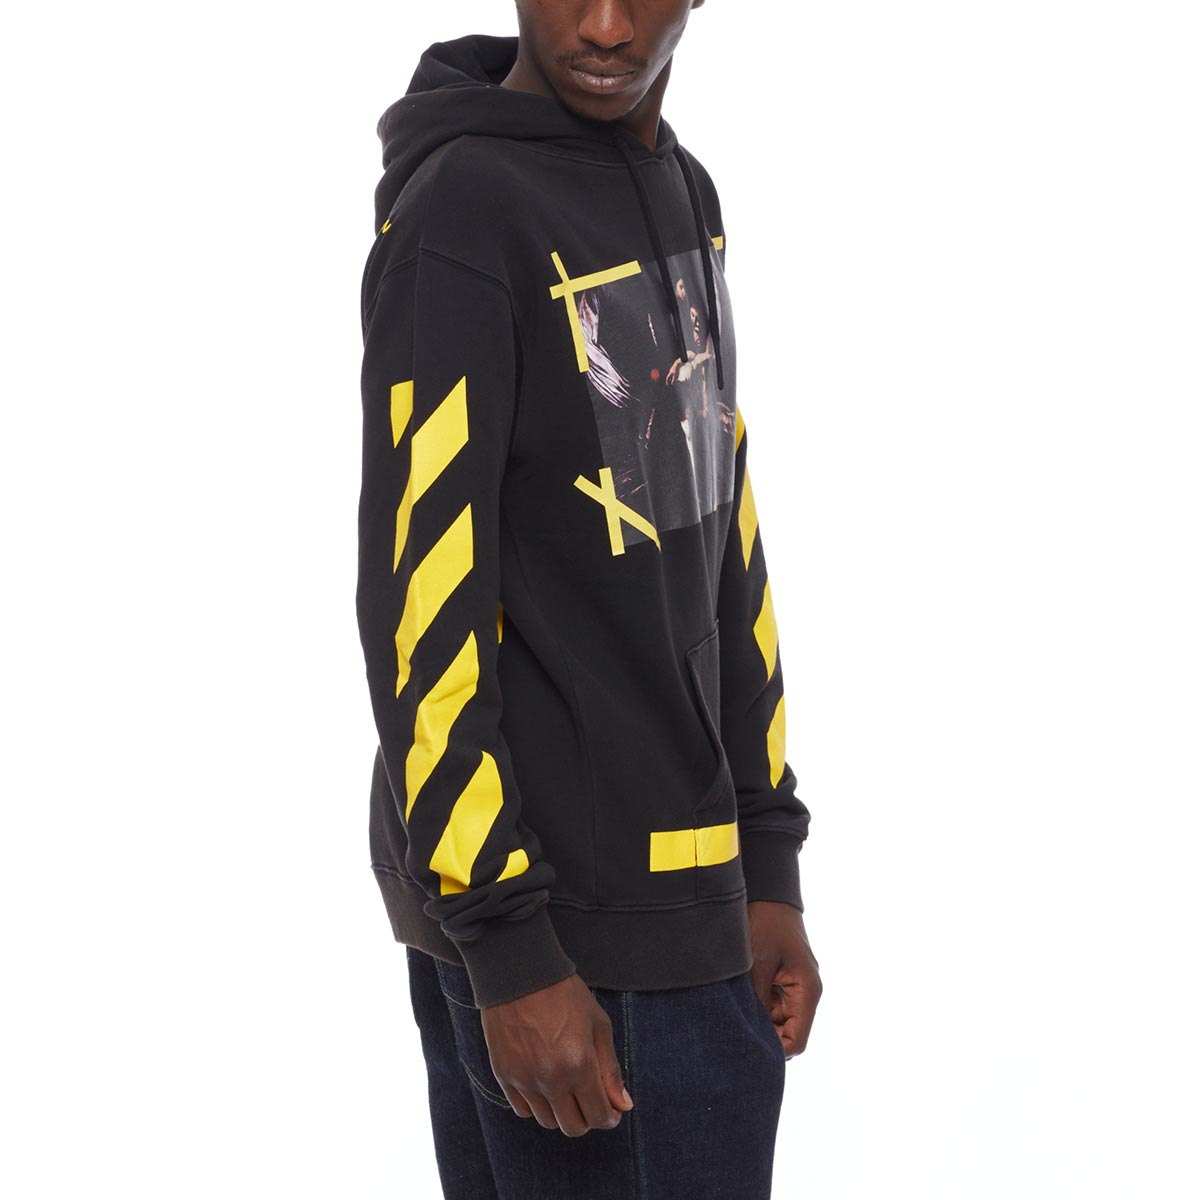 Lyst - Off-White C/O Virgil Abloh 7 Opere Cotton Hoodie in Black for Men